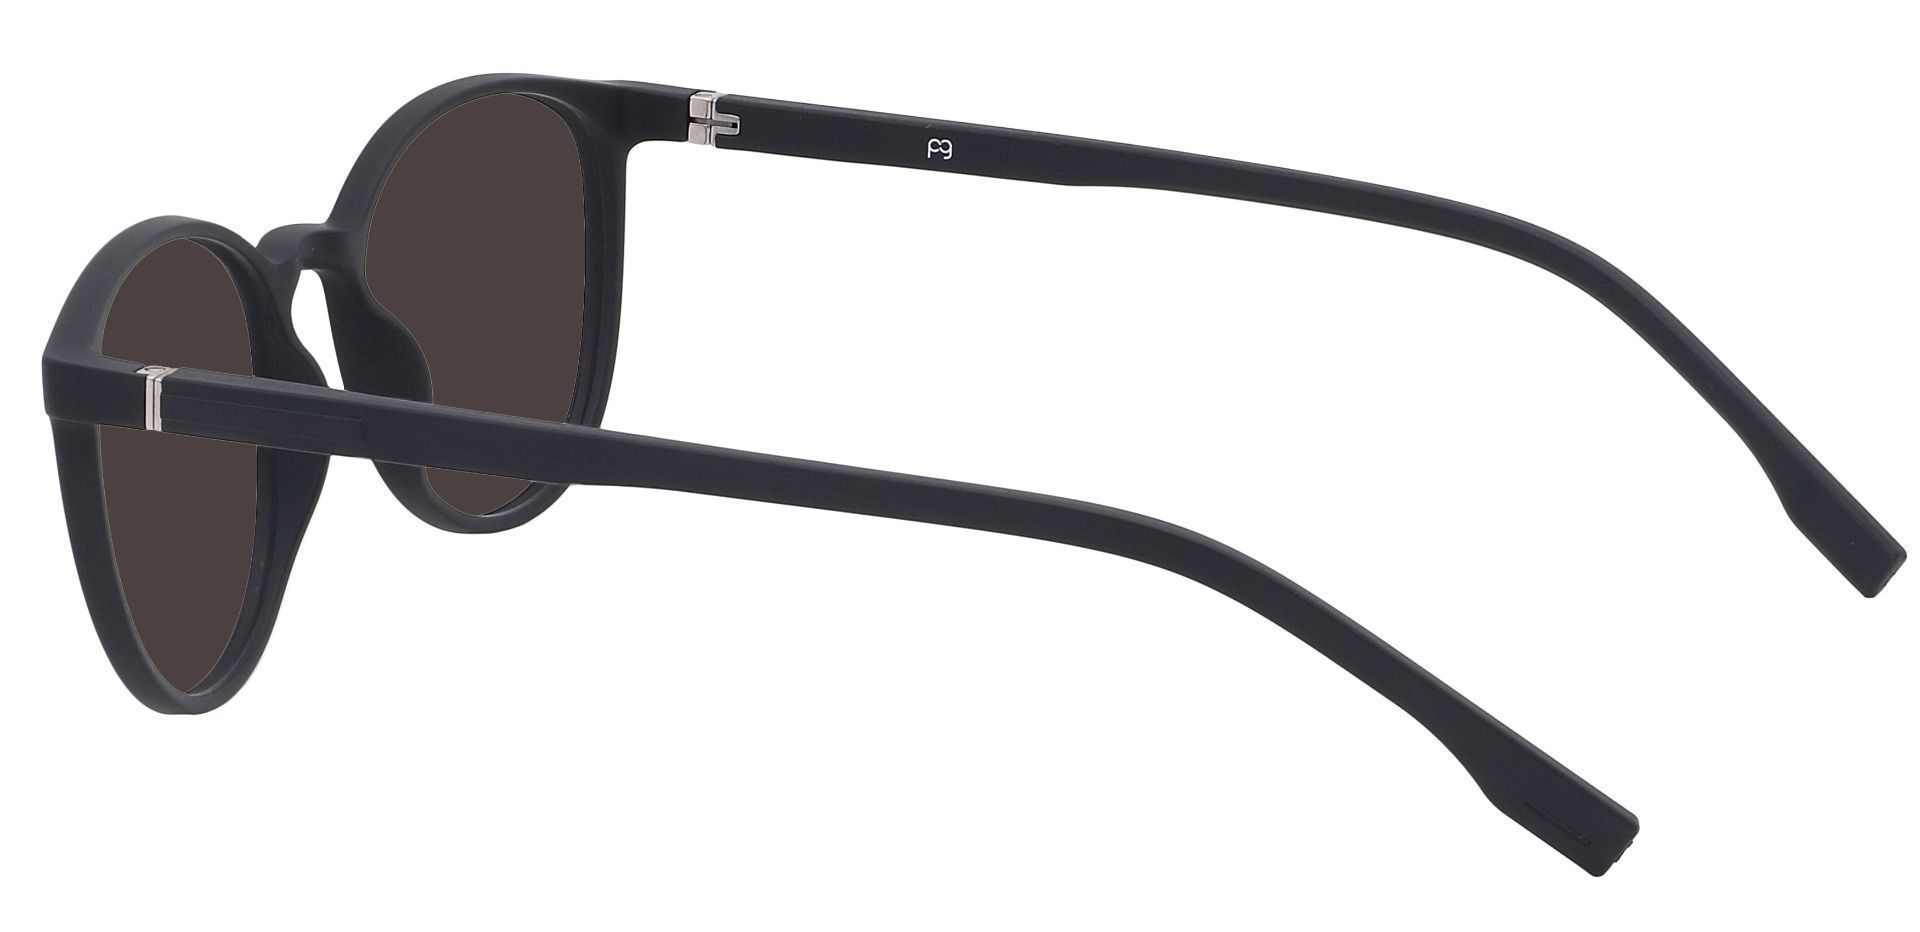 Bay Round Non-Rx Sunglasses - Black Frame With Gray Lenses